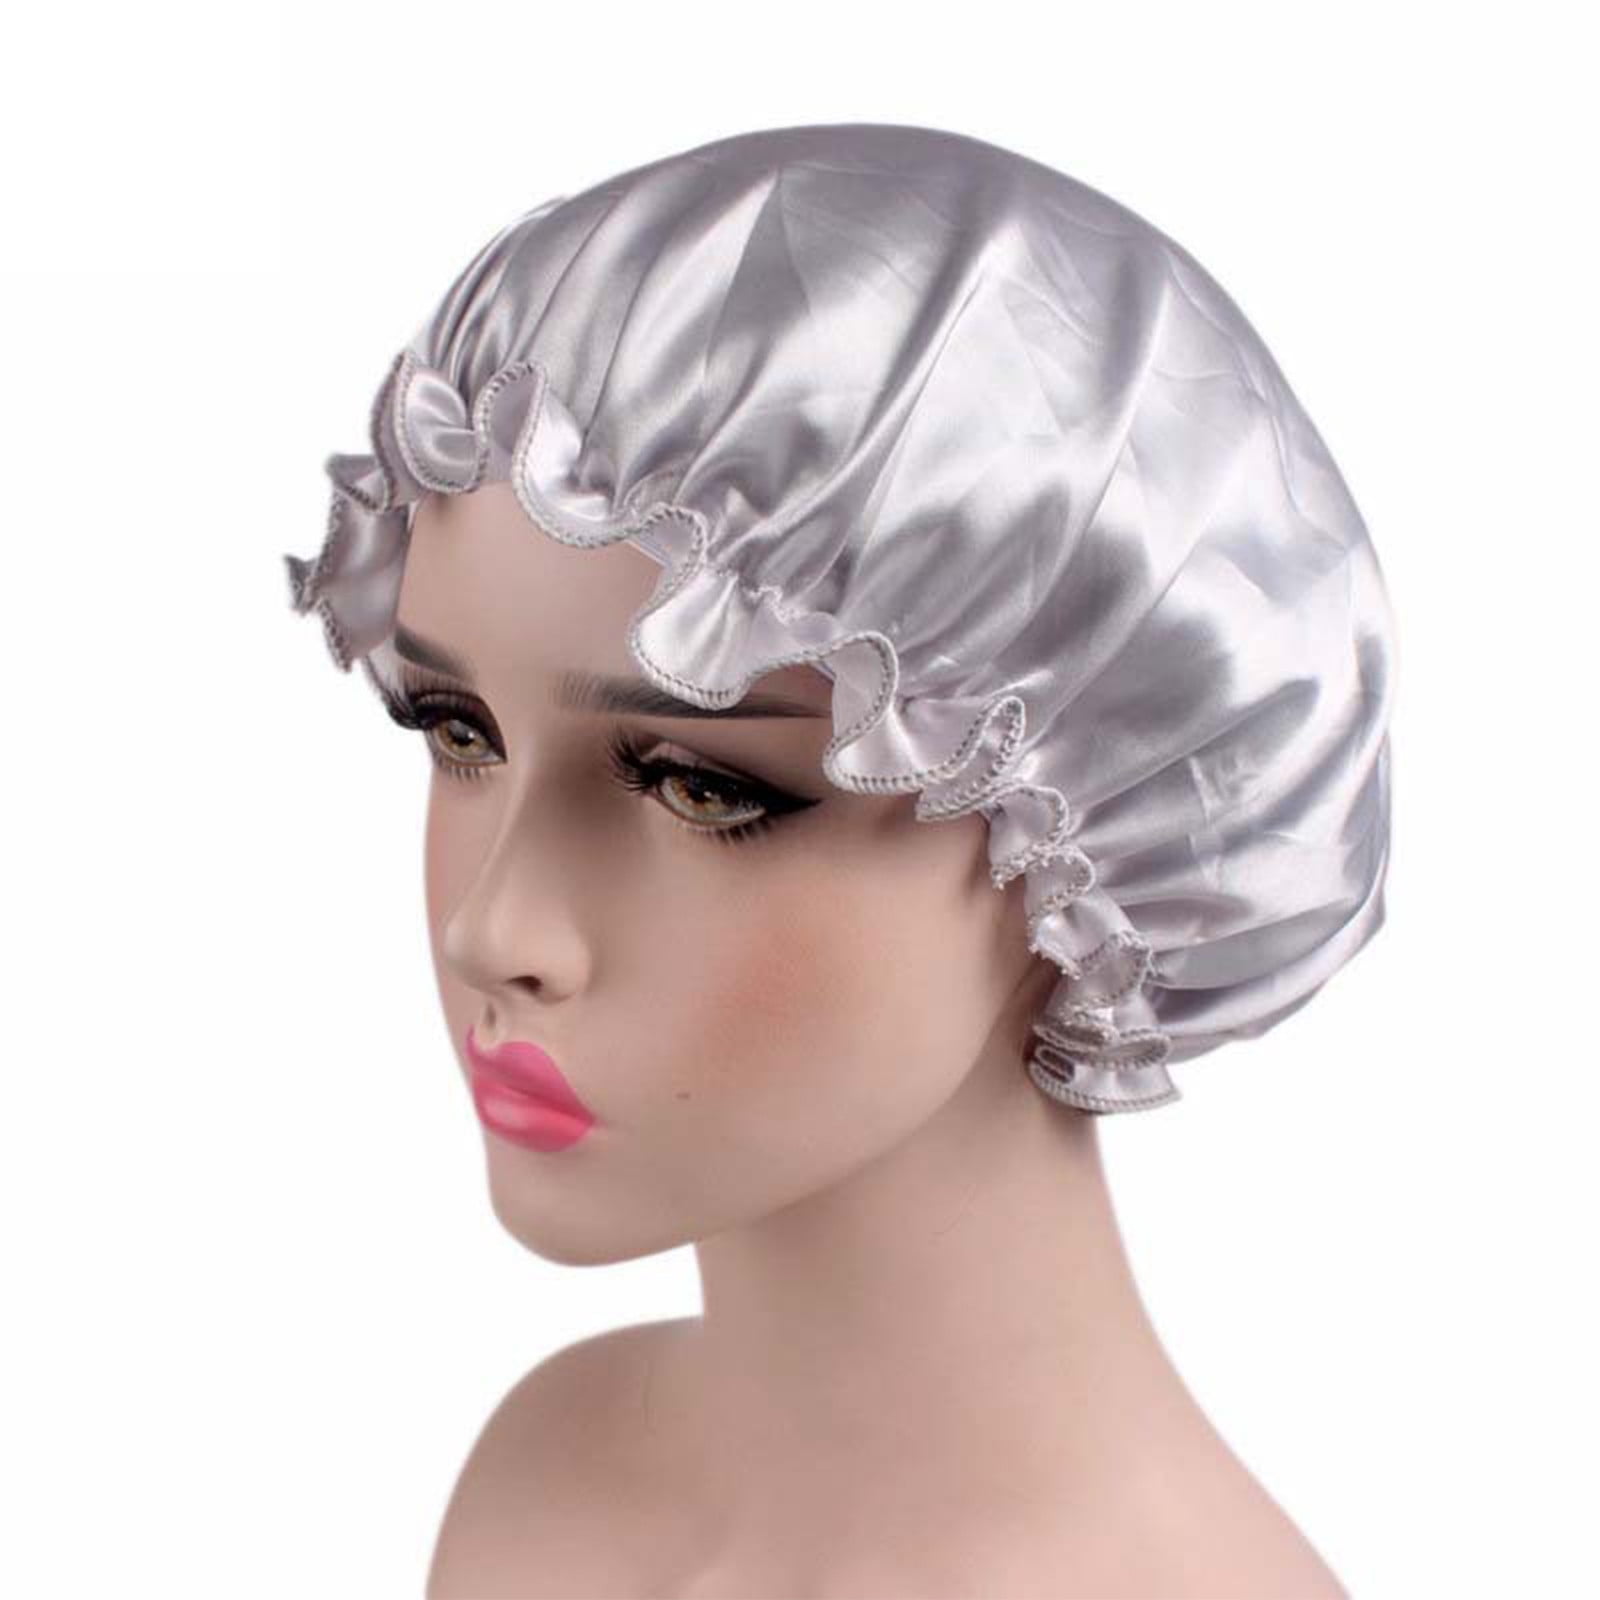 Womens Satin Cheveux Nuit With Wide Band For Fashionable Beauty Salon And  Chemo Soft Cap From Saucy, $29.53